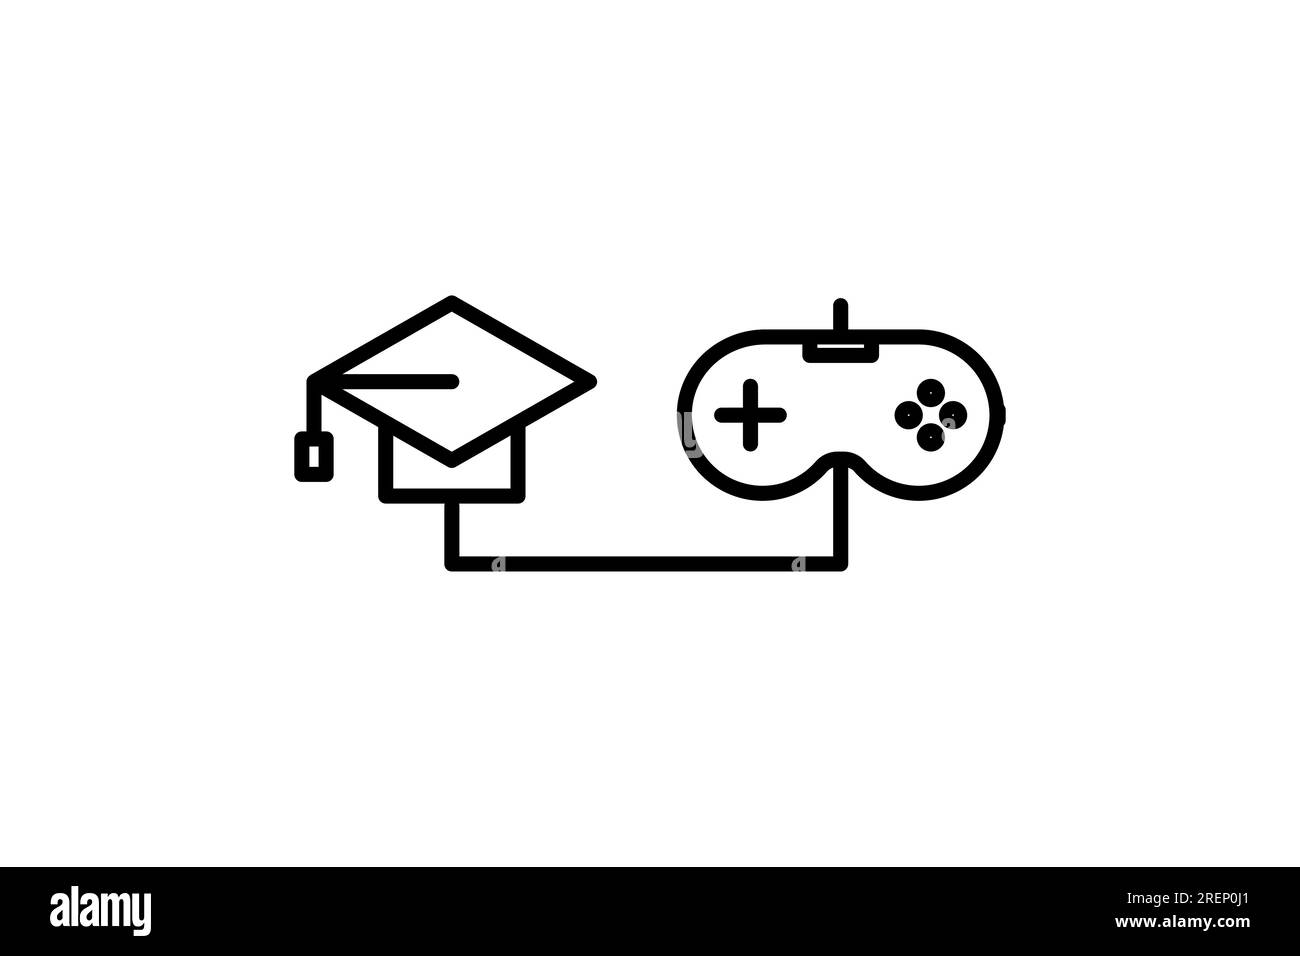 education game icon. Icon related to stationery. line icon style. Simple vector design editable Stock Vector